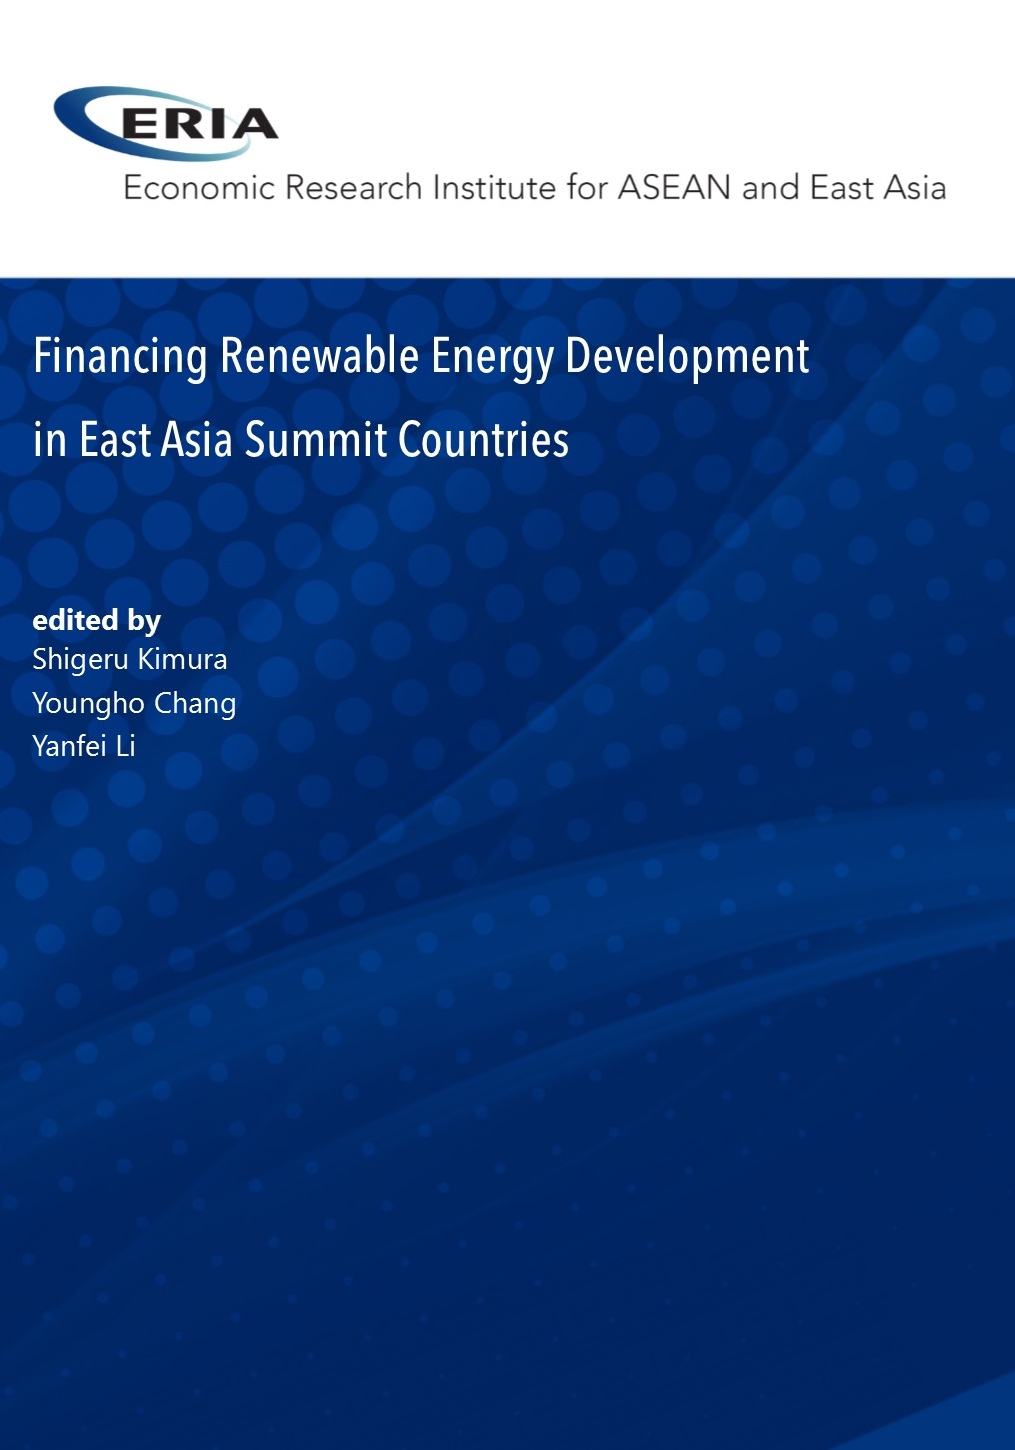 Financing Renewable Energy Development in East Asia Summit Countries<br />A Primer of Effective Policy Instruments